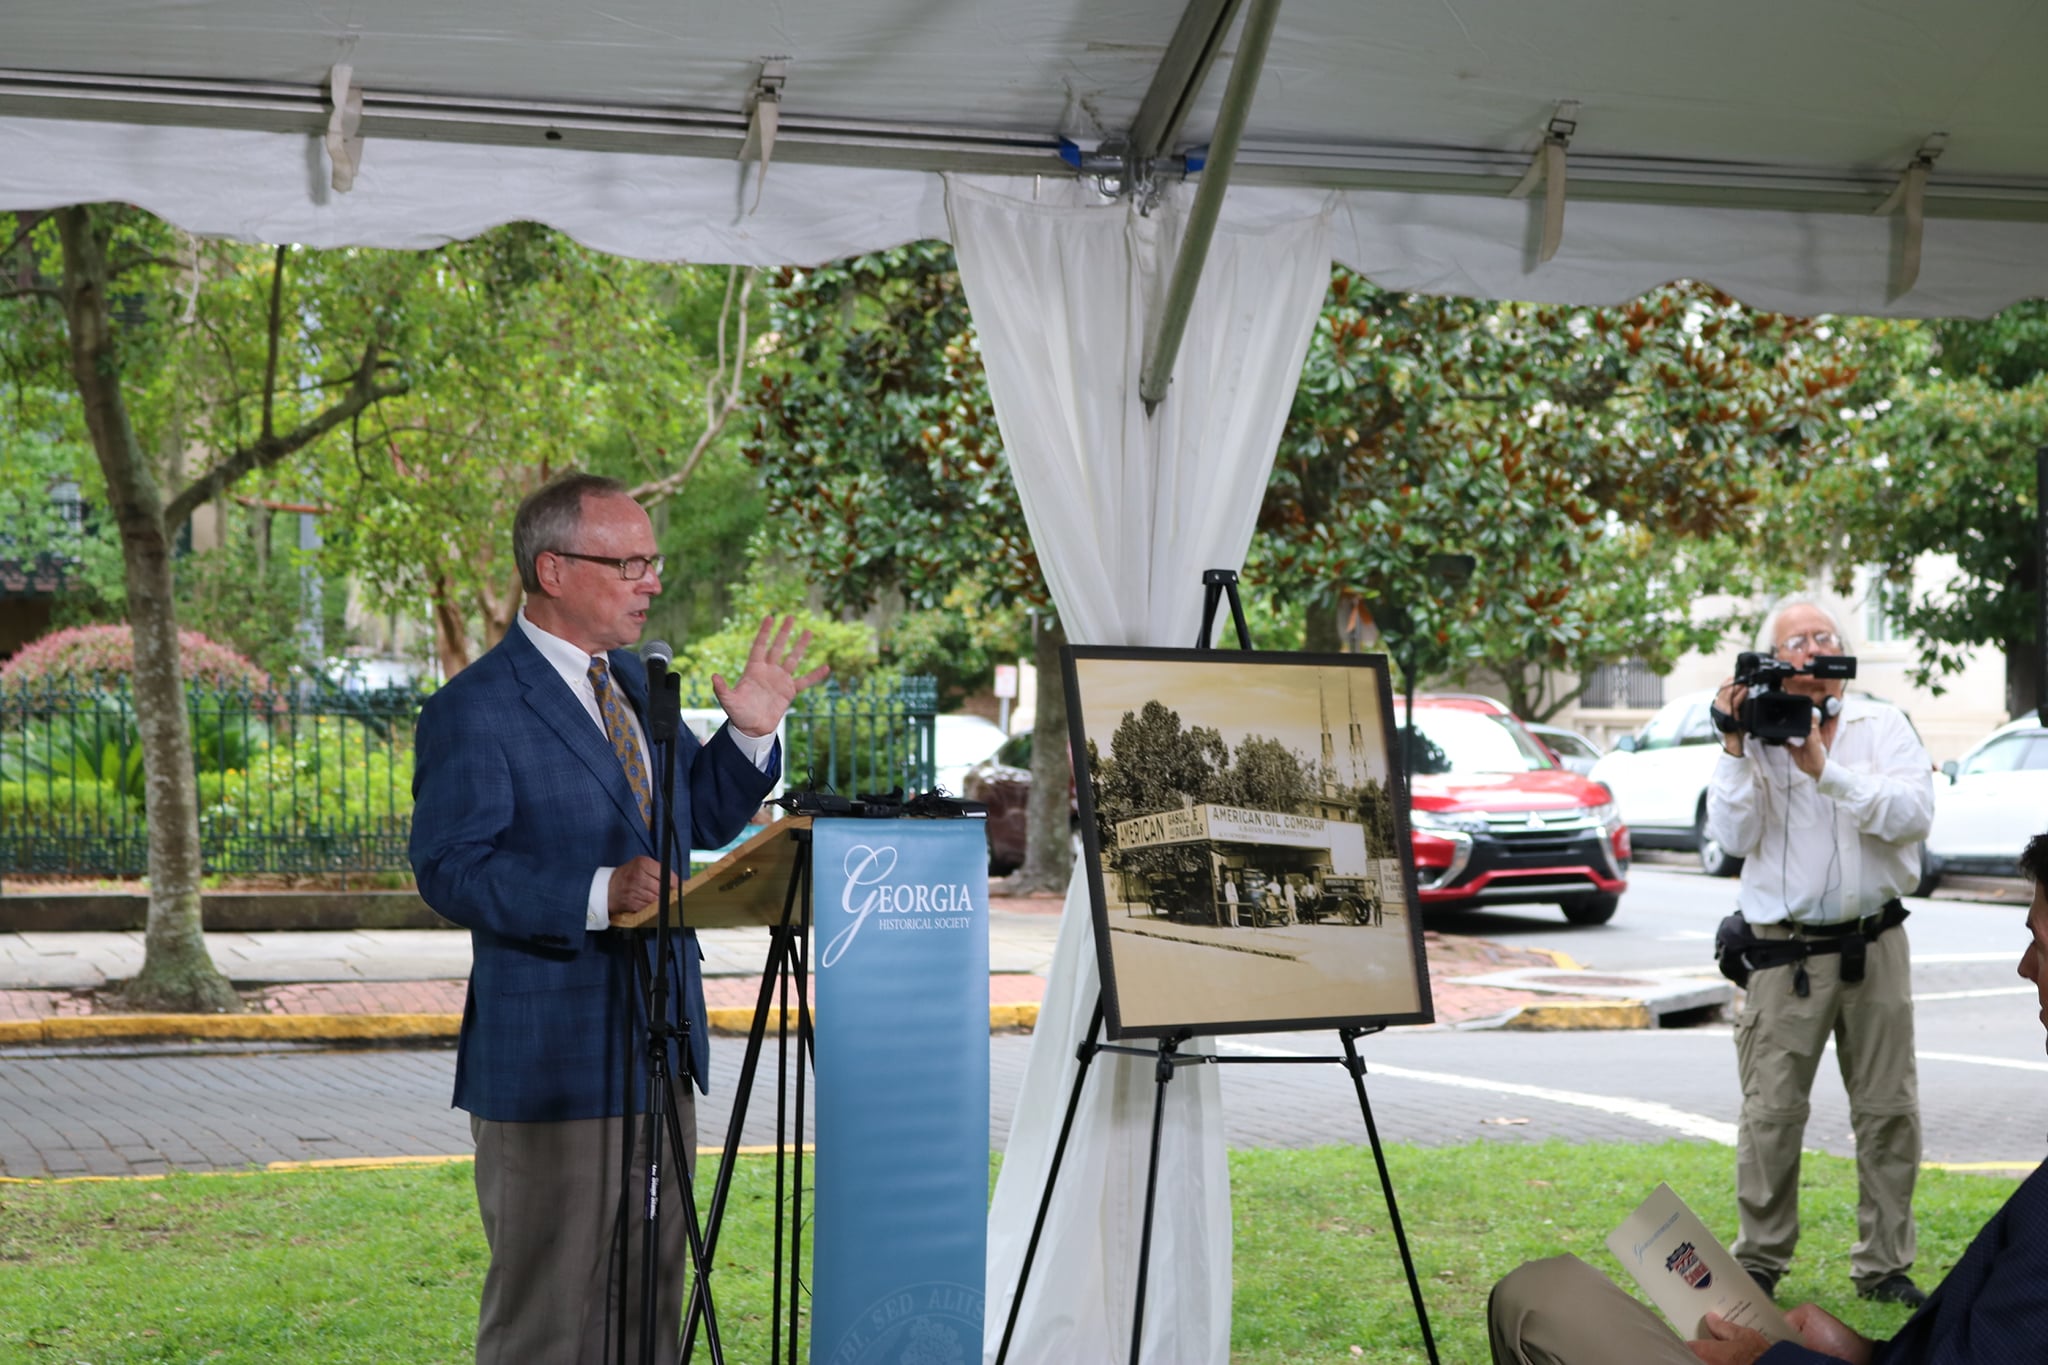 Dr. W. Todd Groce, President and CEO of the Georgia Historical Society, served as Master of Ceremonies.